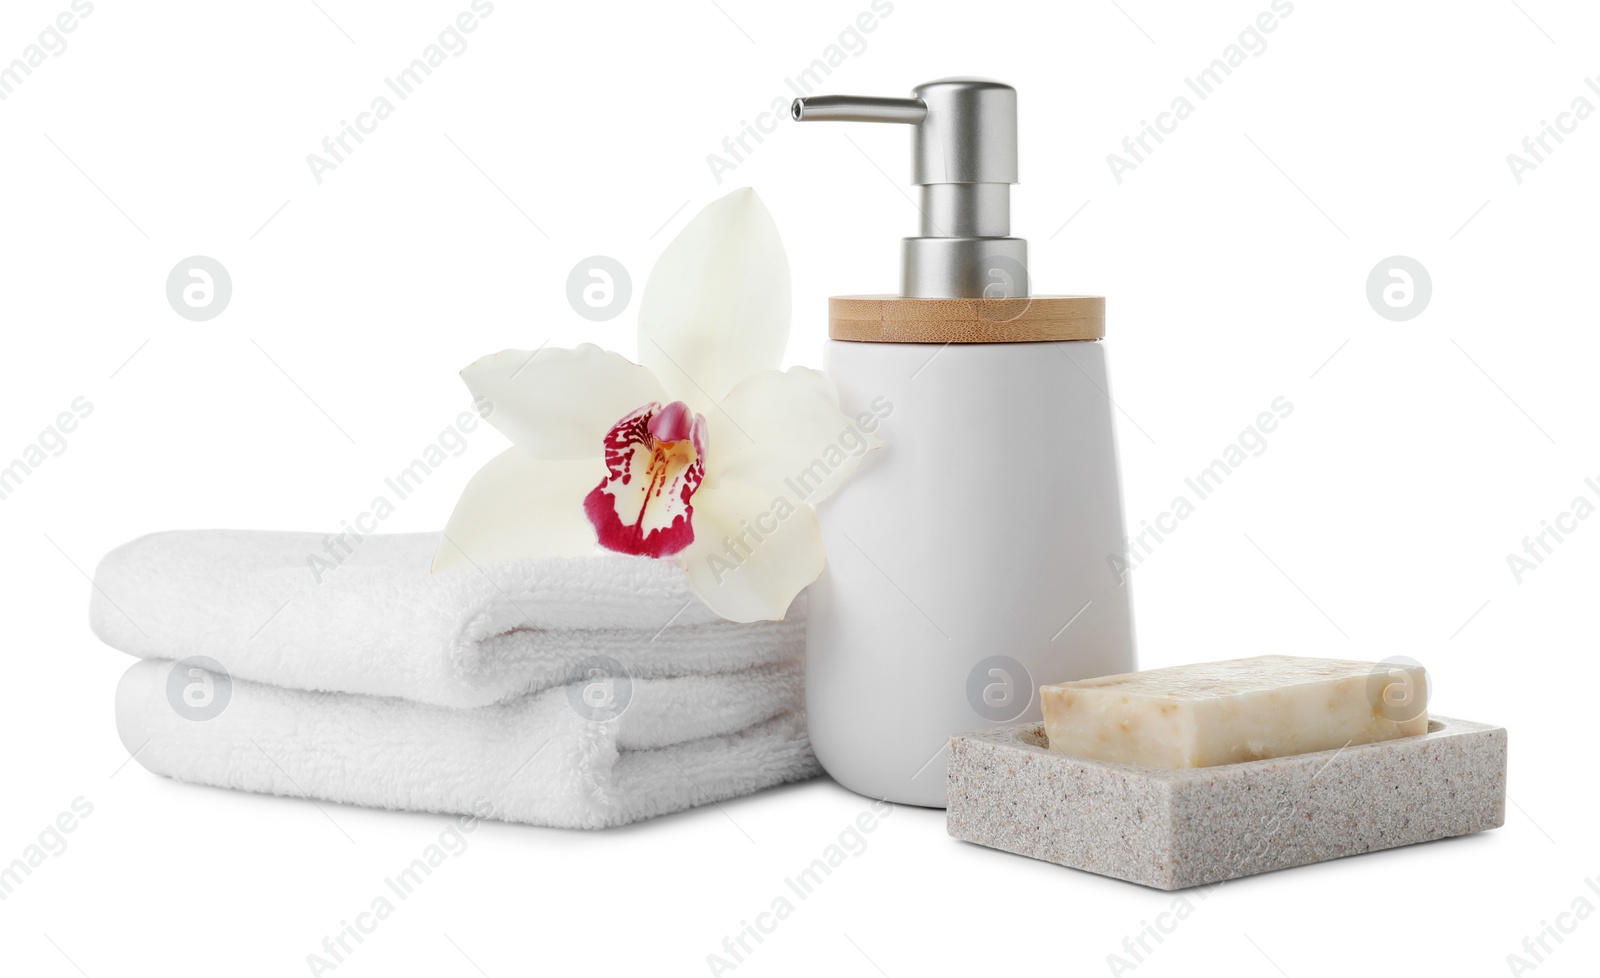 Photo of Dish with soap bar, dispenser and terry towels on white background